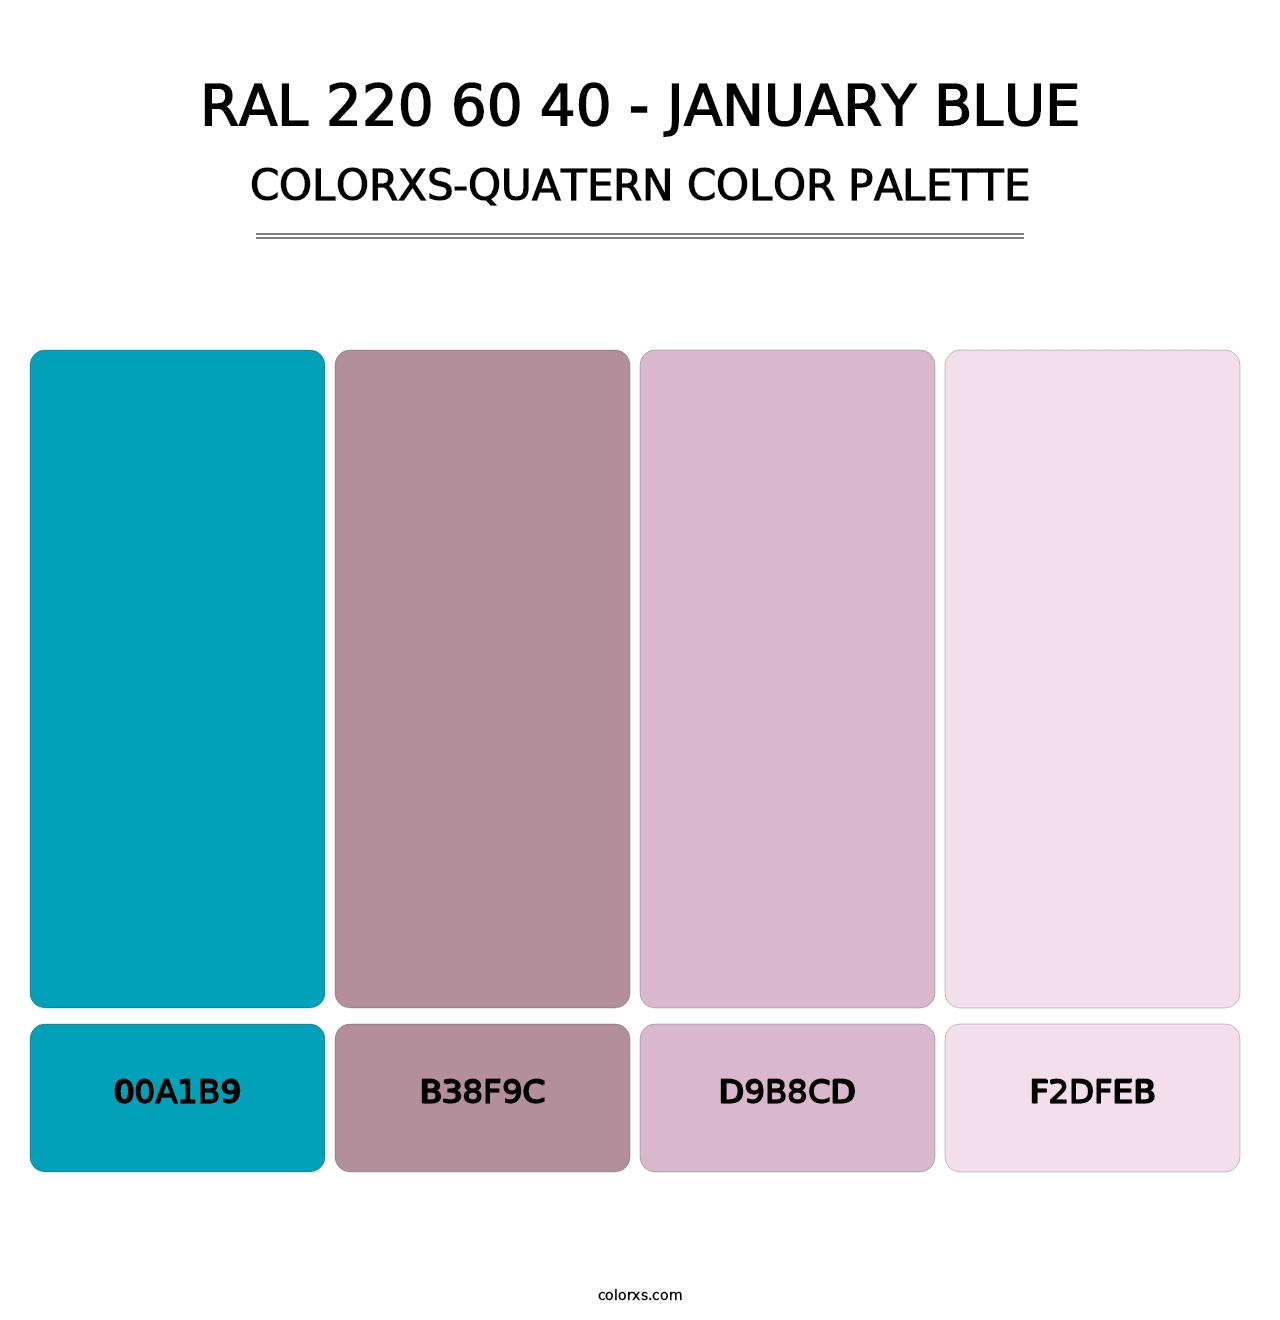 RAL 220 60 40 - January Blue - Colorxs Quatern Palette